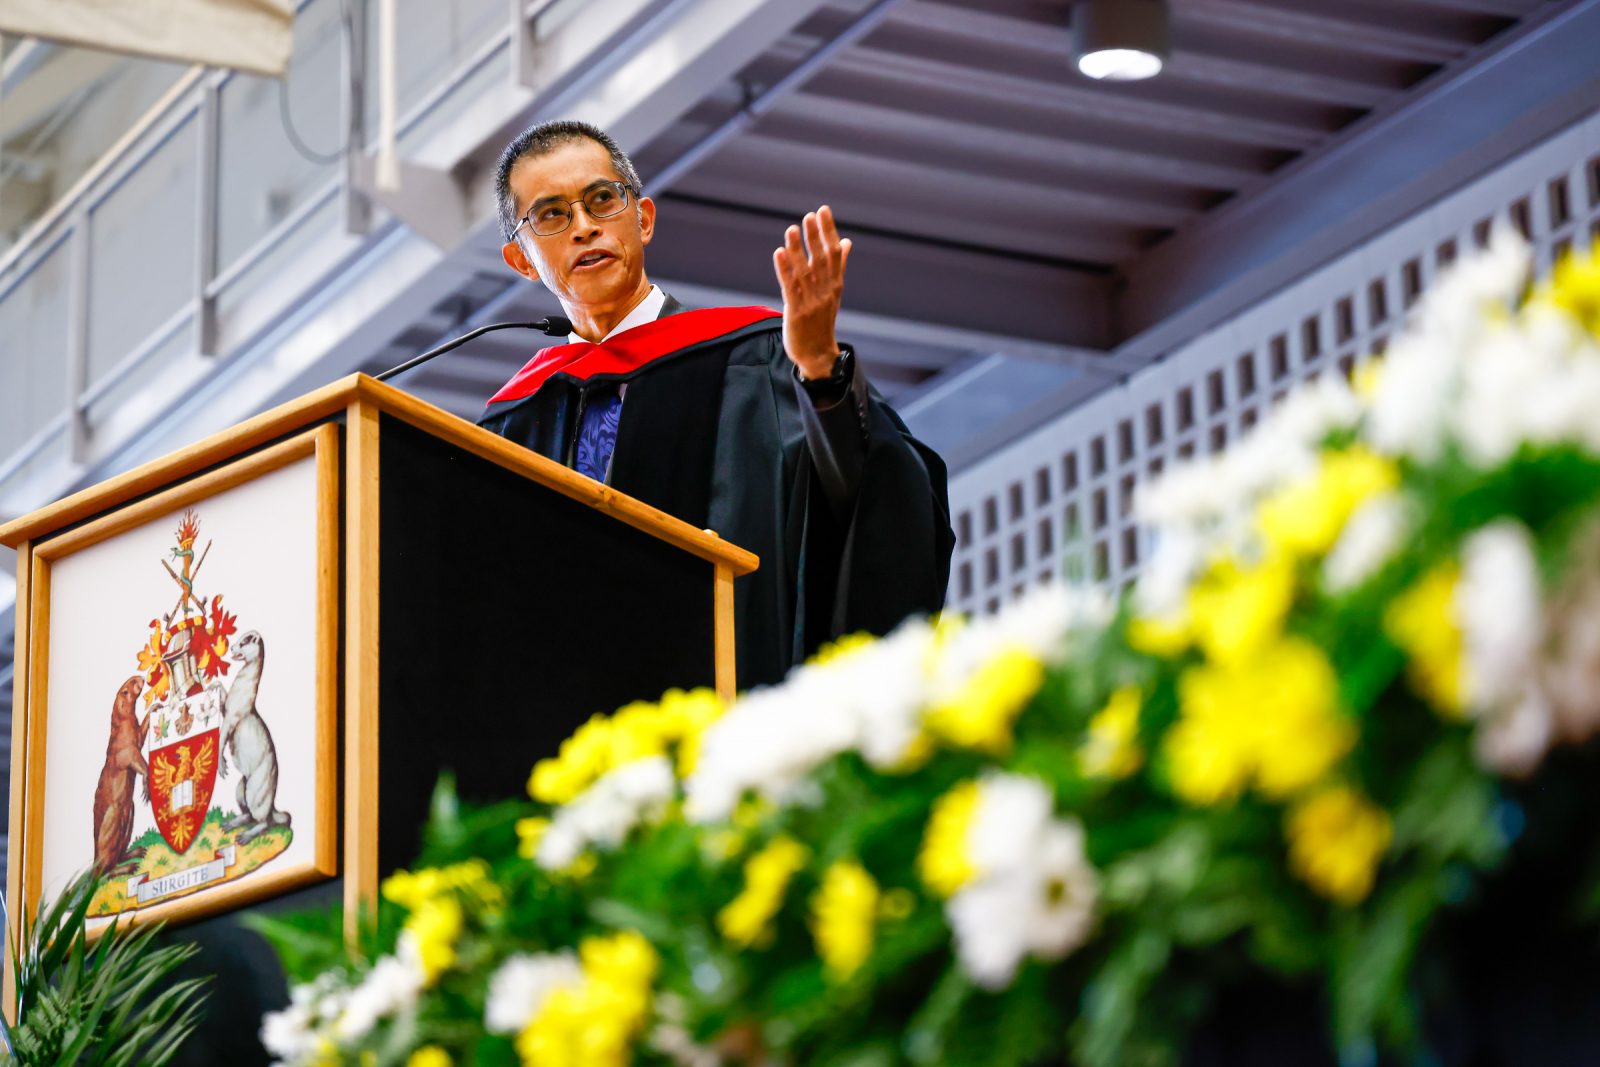 Stephen Cheung, dressed in academic regalia, speaking at a podium on a stage during a Brock University Convocation ceremony.